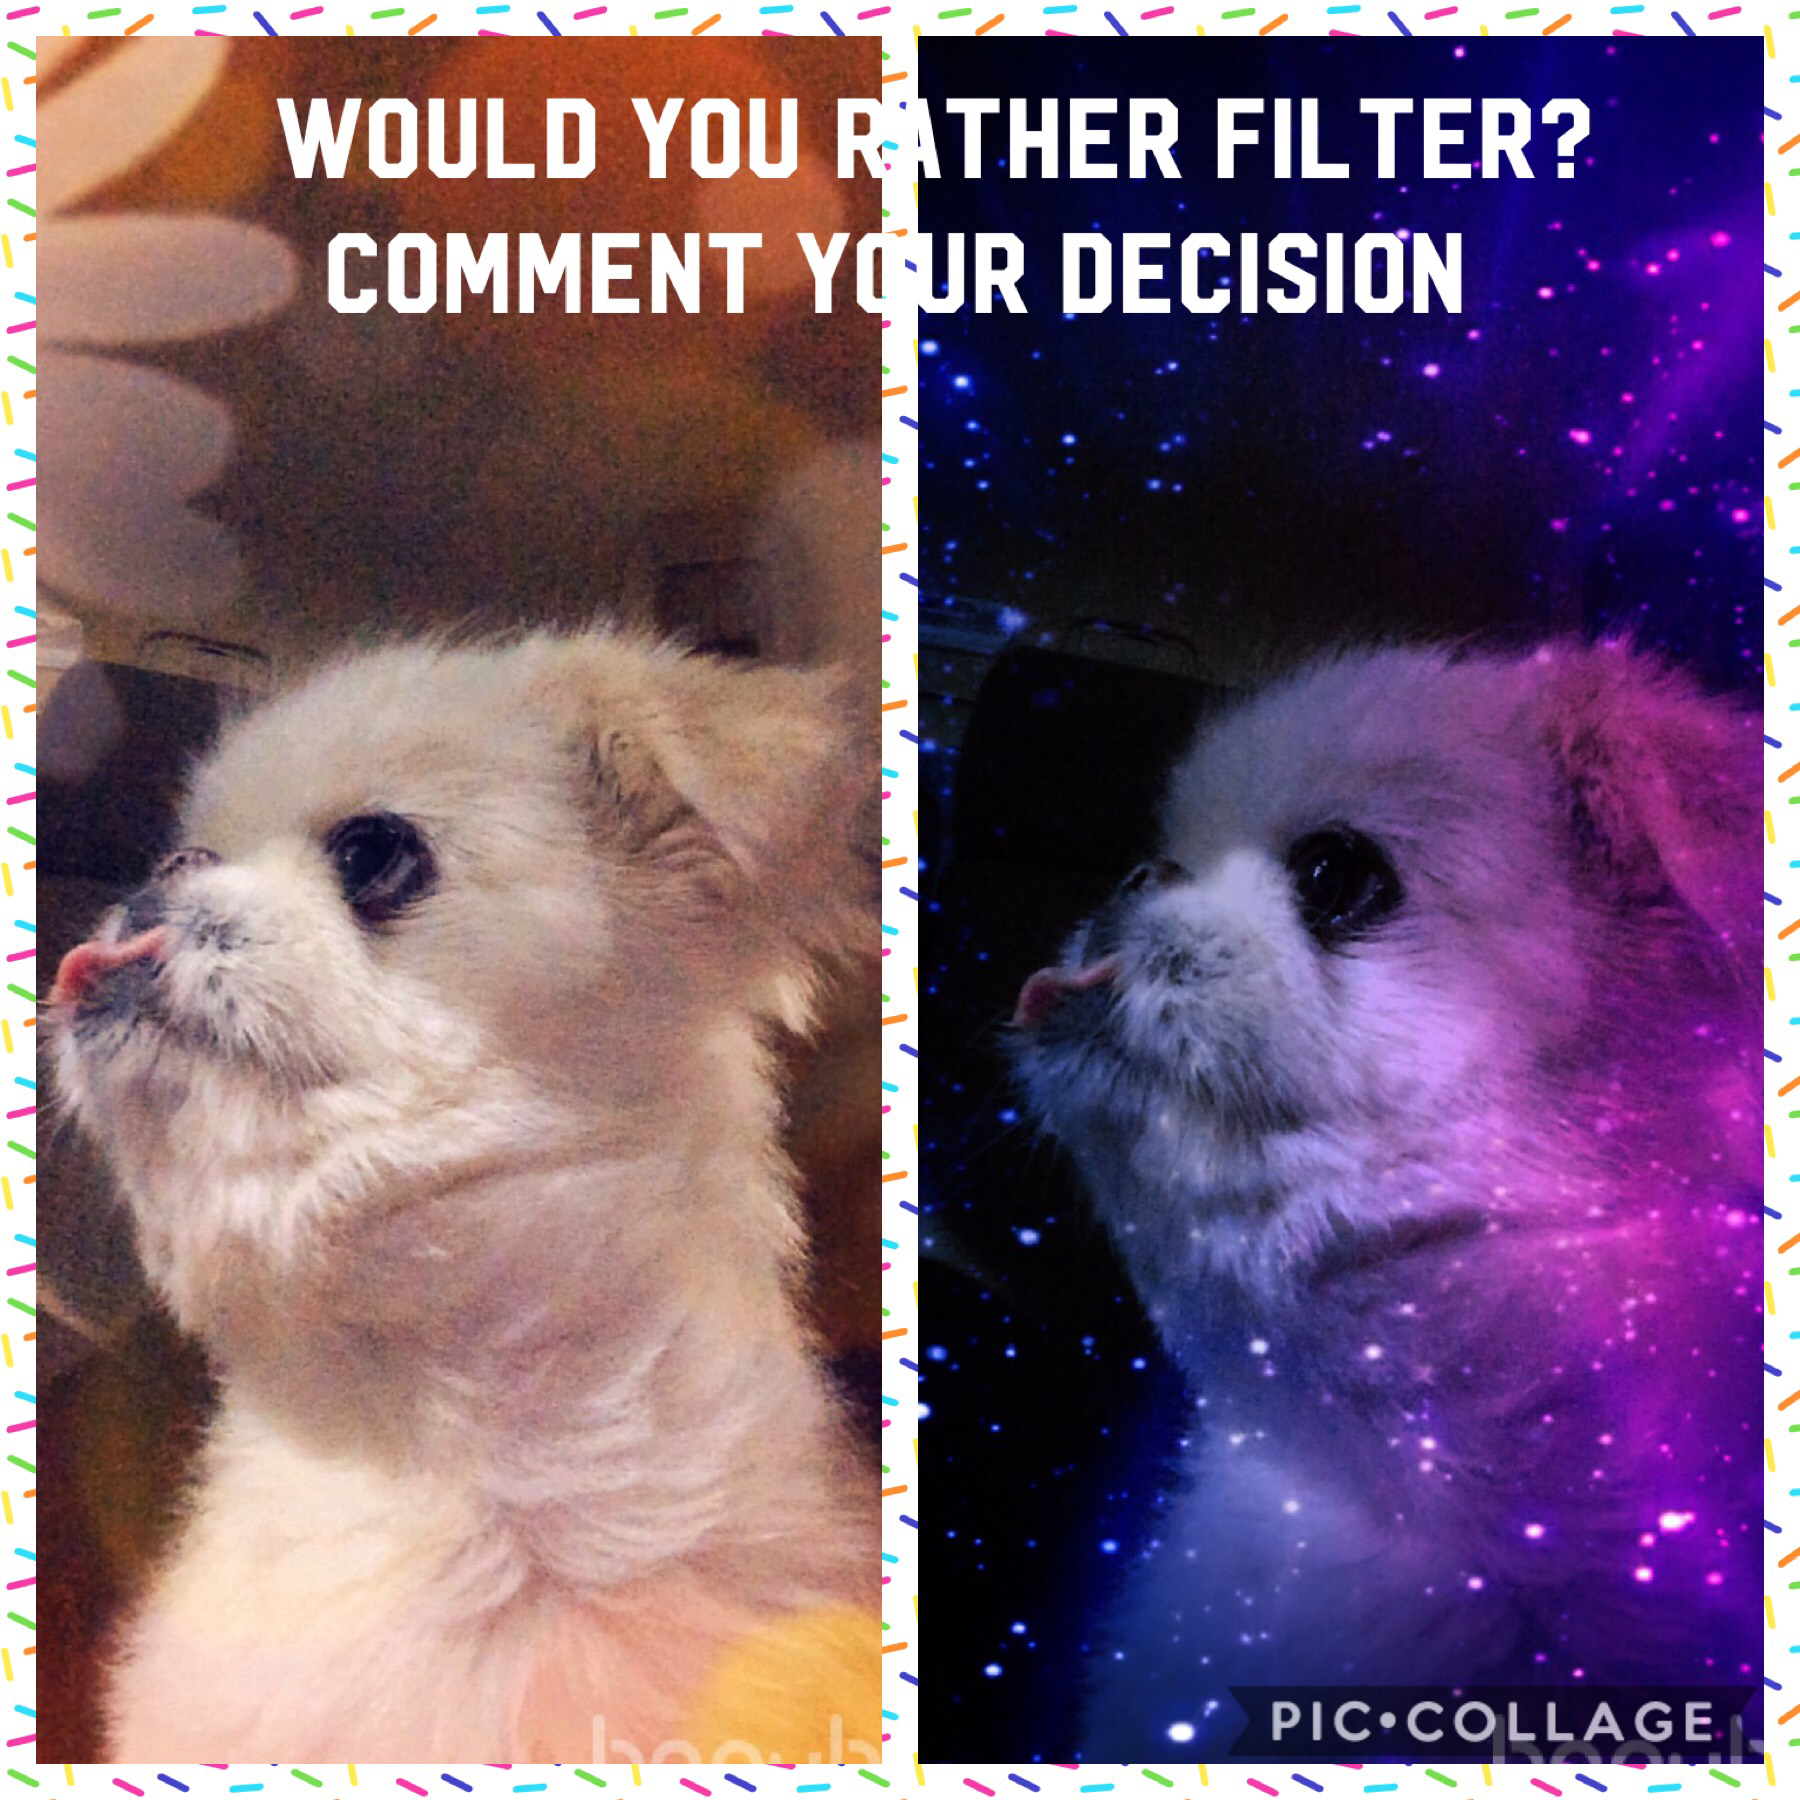 Would you rather space filter, or fall filter? Comment your decision plz!